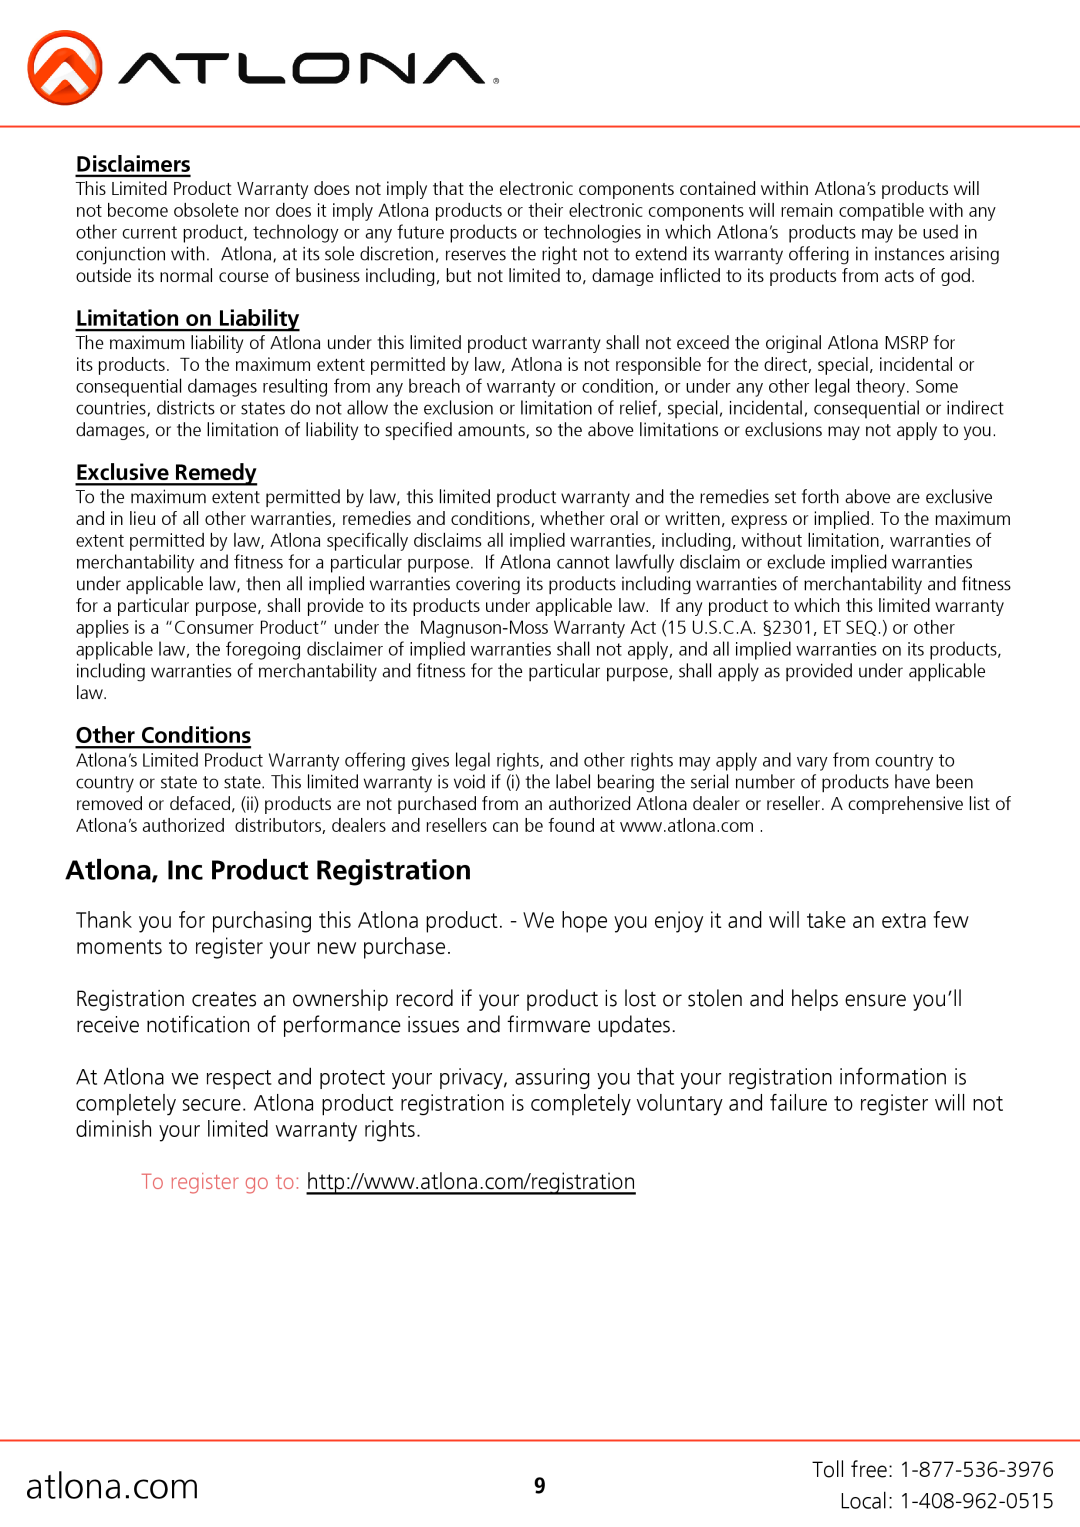 Atlona AT-HDDA-2 user manual Atlona, Inc Product Registration, Disclaimers, Limitation on Liability, Exclusive Remedy 